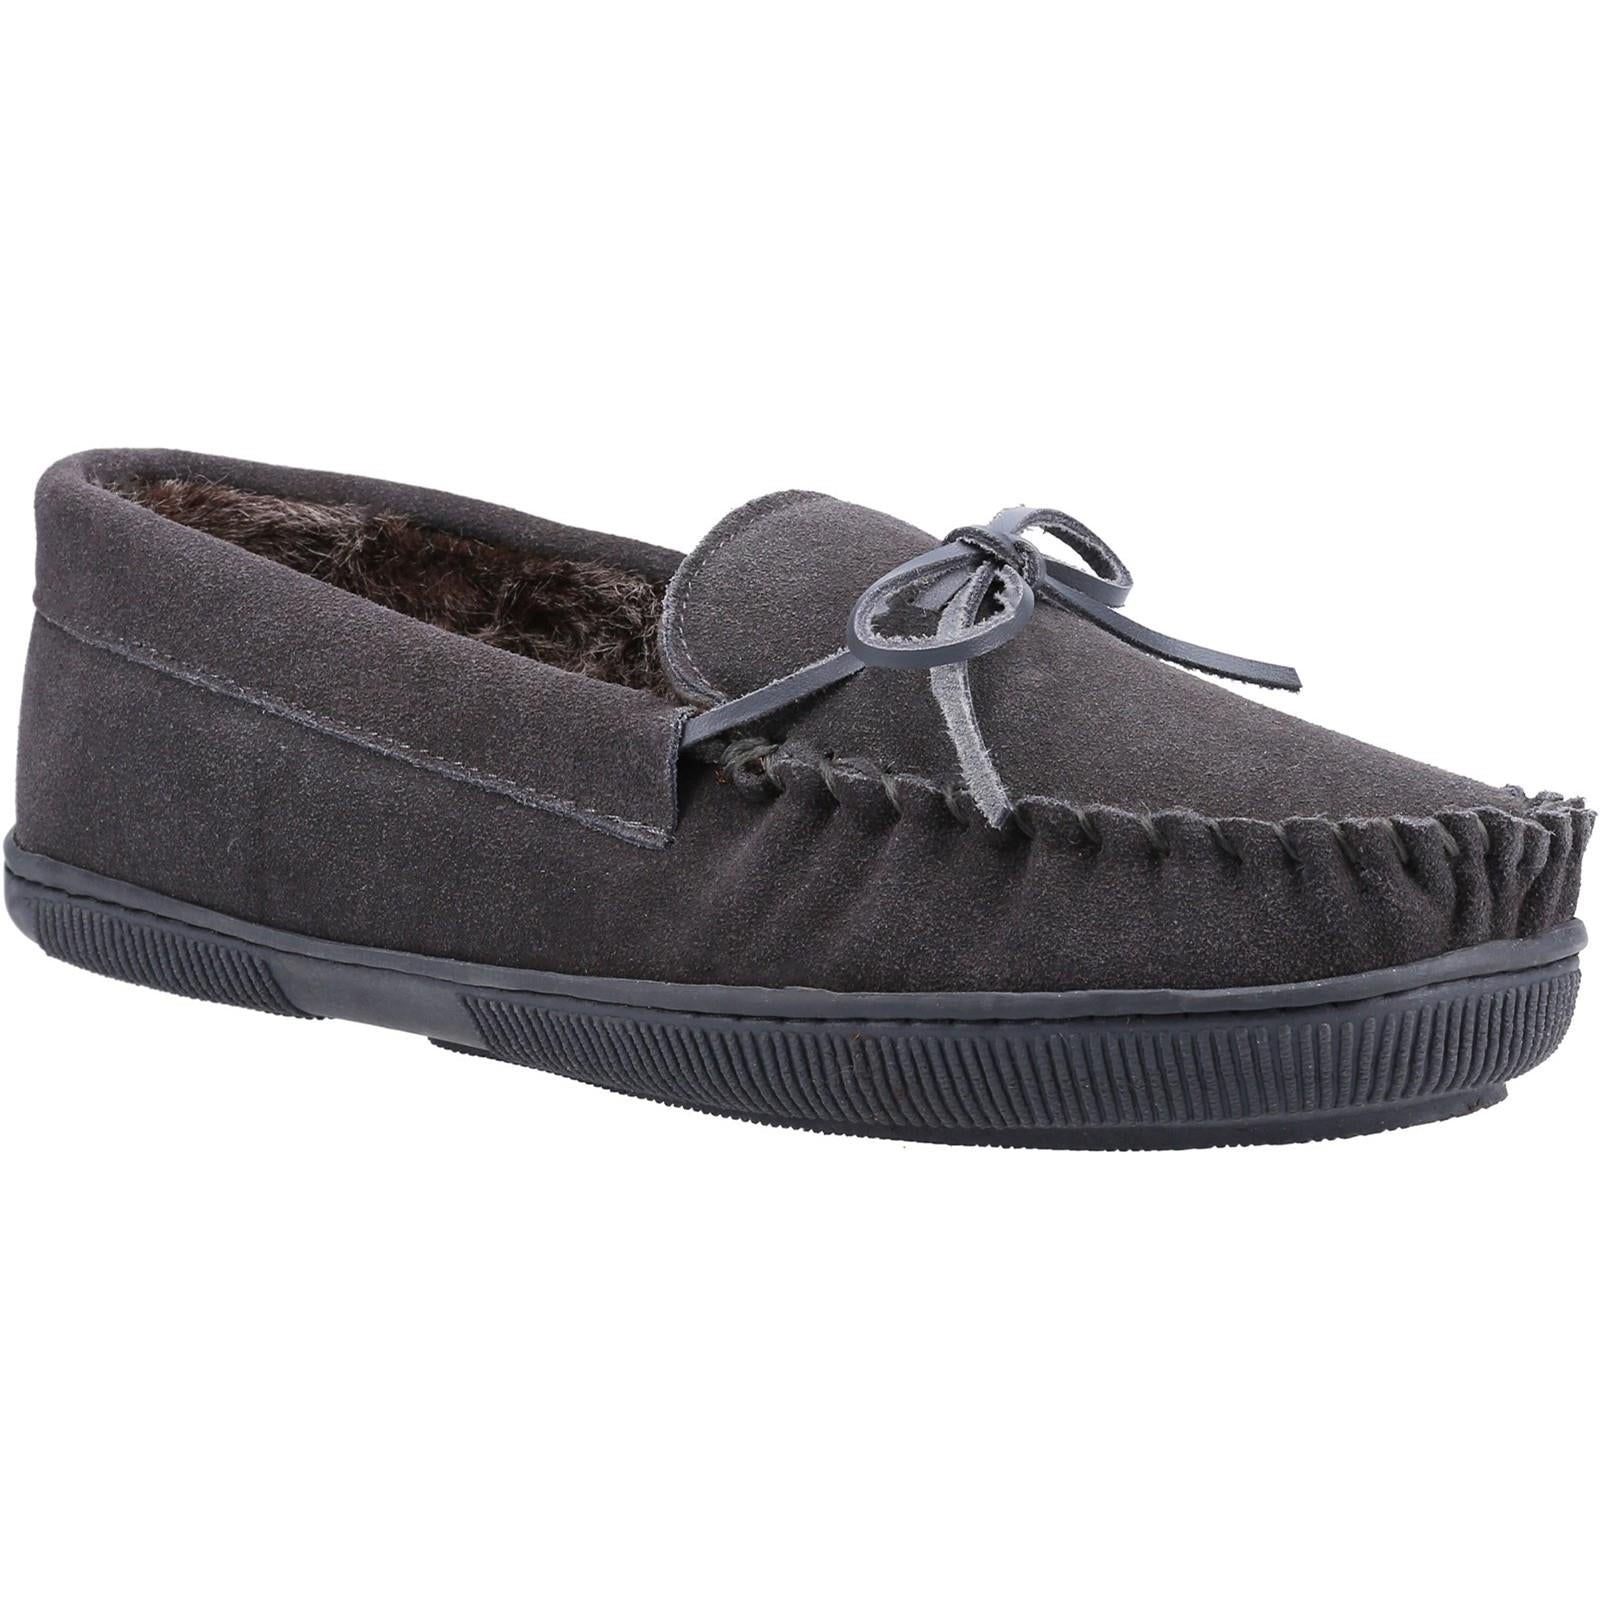 Hush Puppies Ace grey suede upper faux fur lined outdoor sole men's slipper